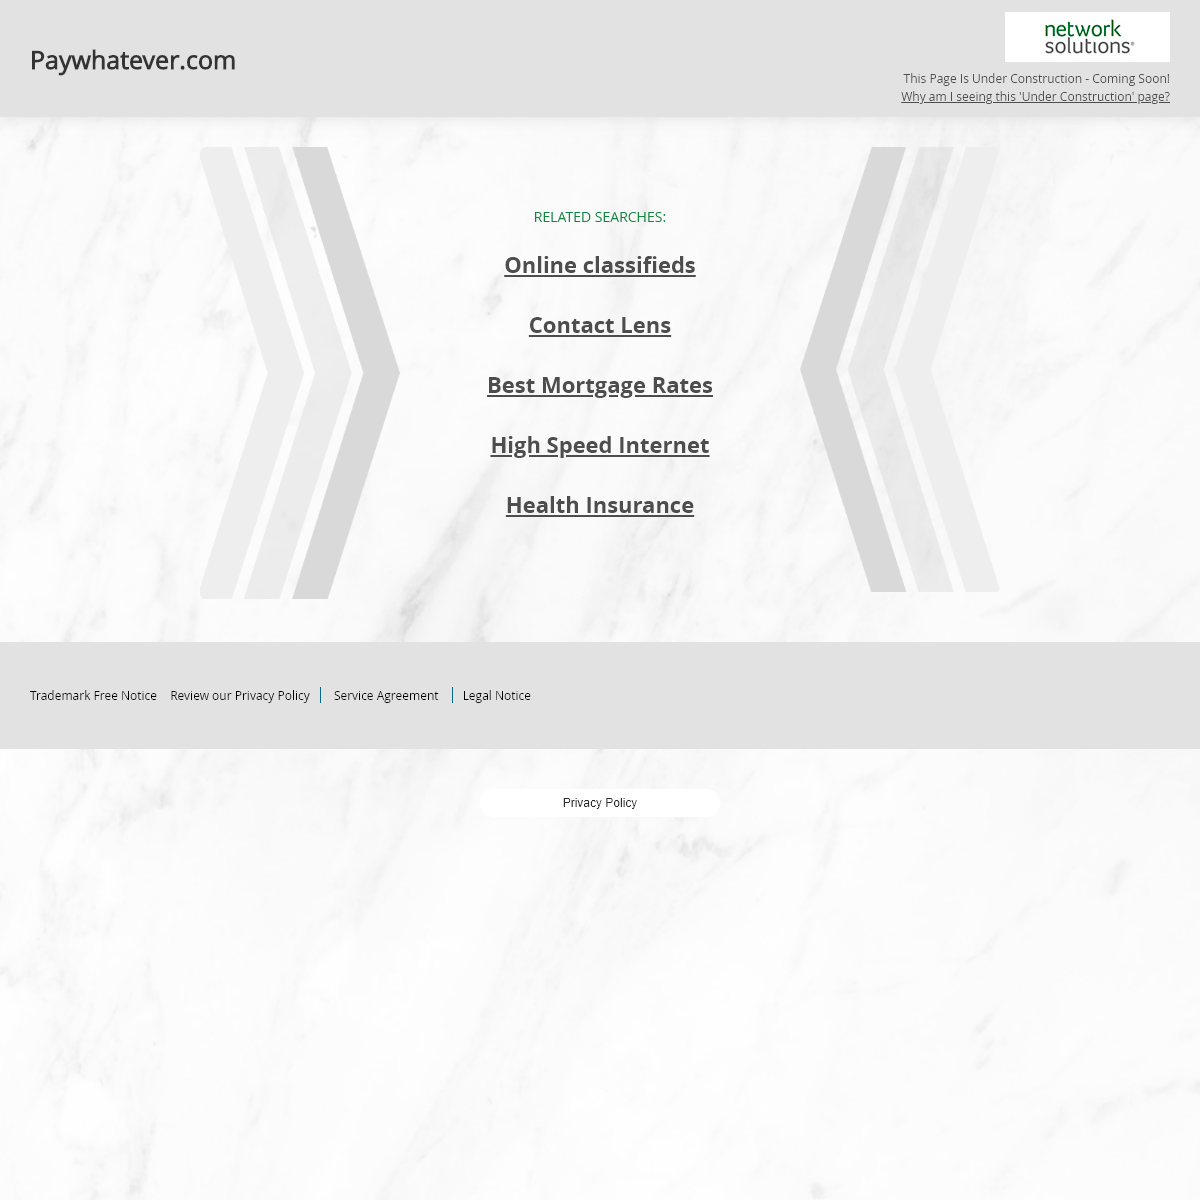 A complete backup of paywhatever.com